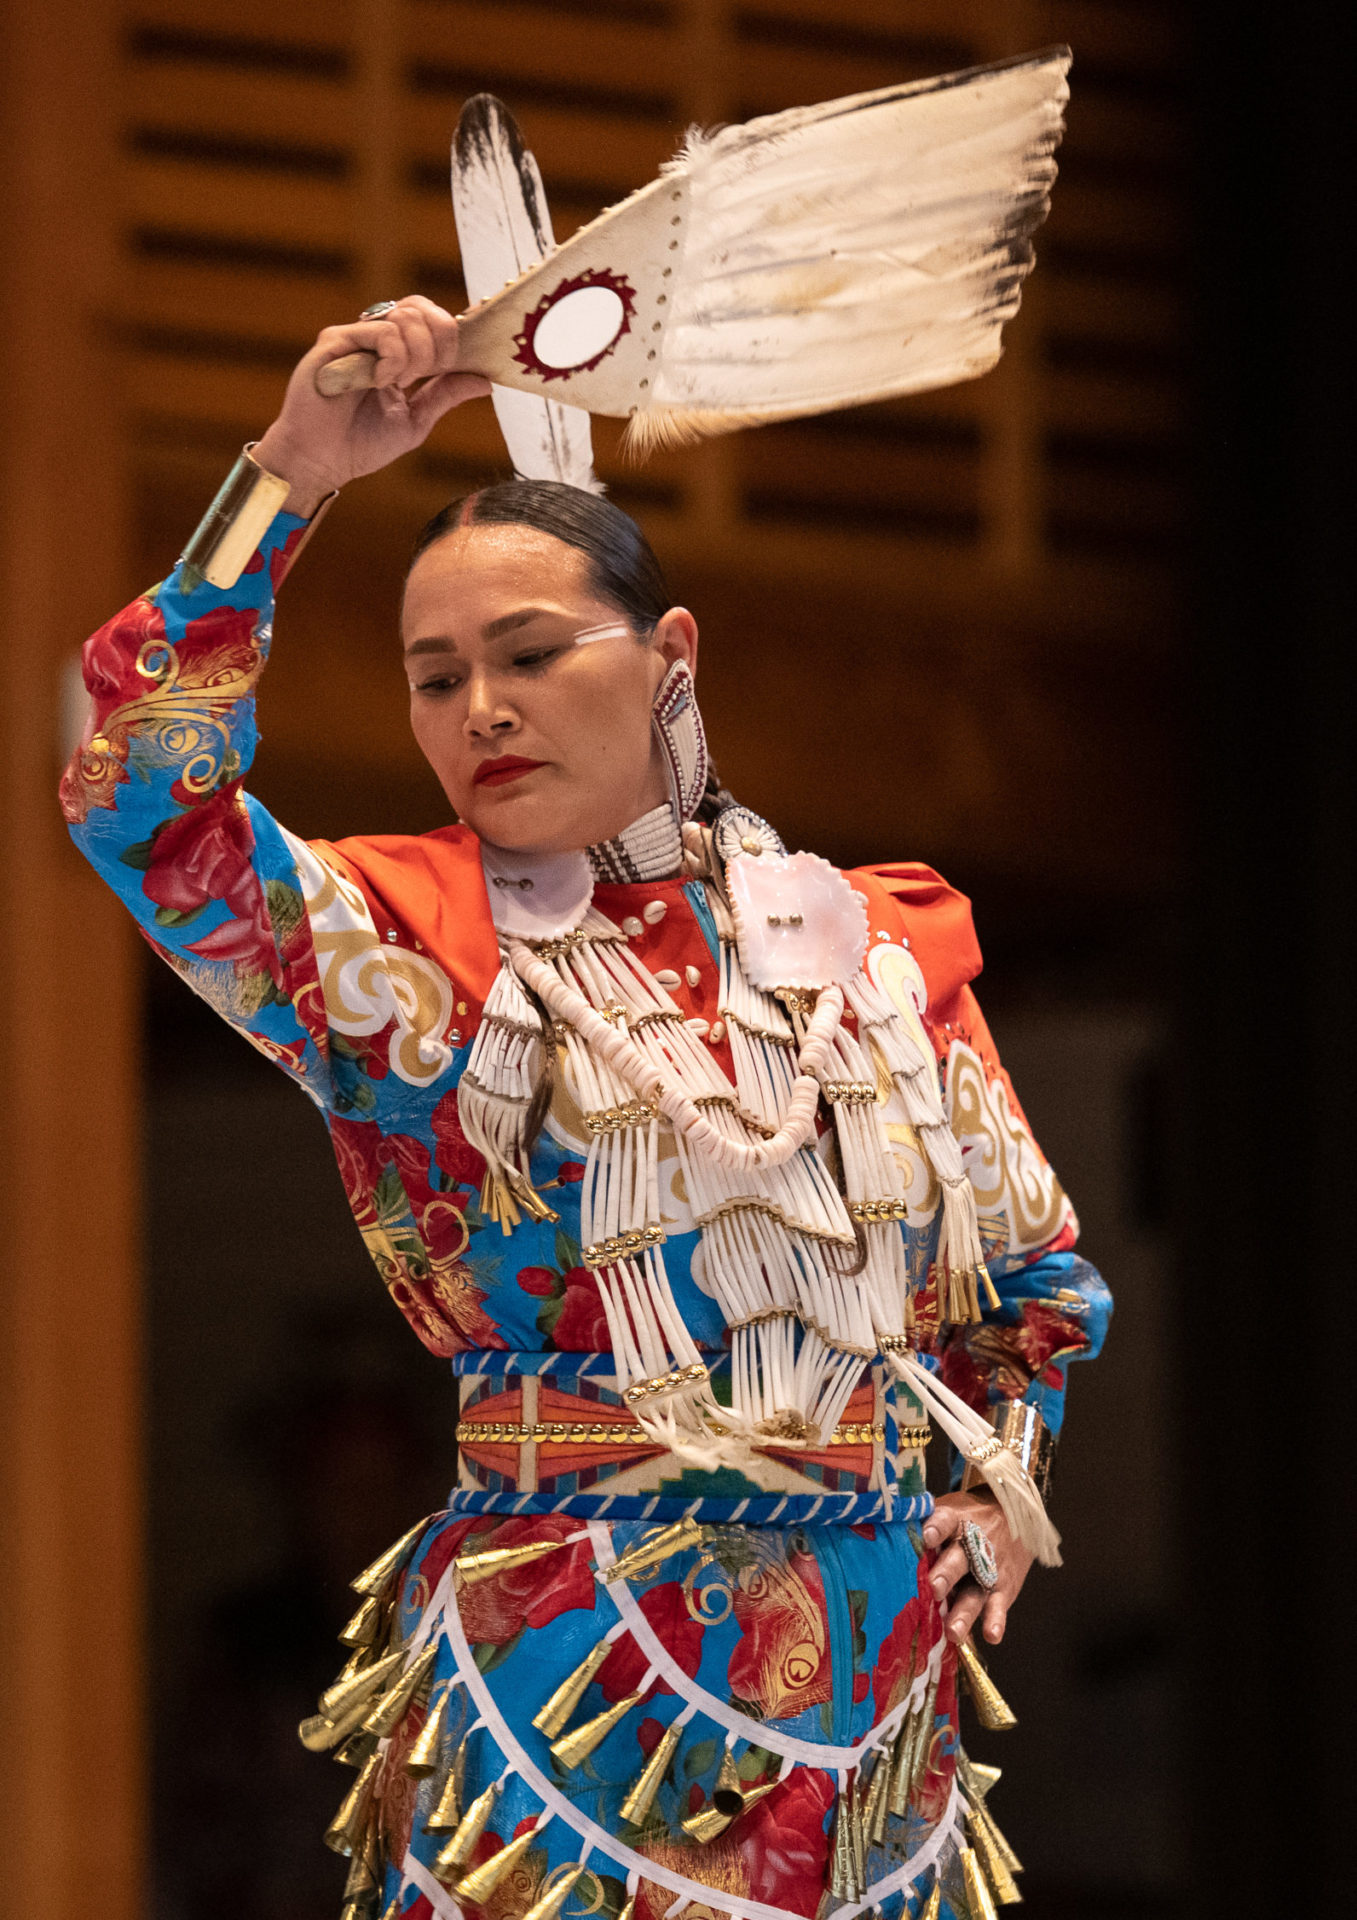 World champion jingle dancer Acosia Red Elk performs at Jacob's Pillow Dance Festival. Press photo courtesy of the Pillow